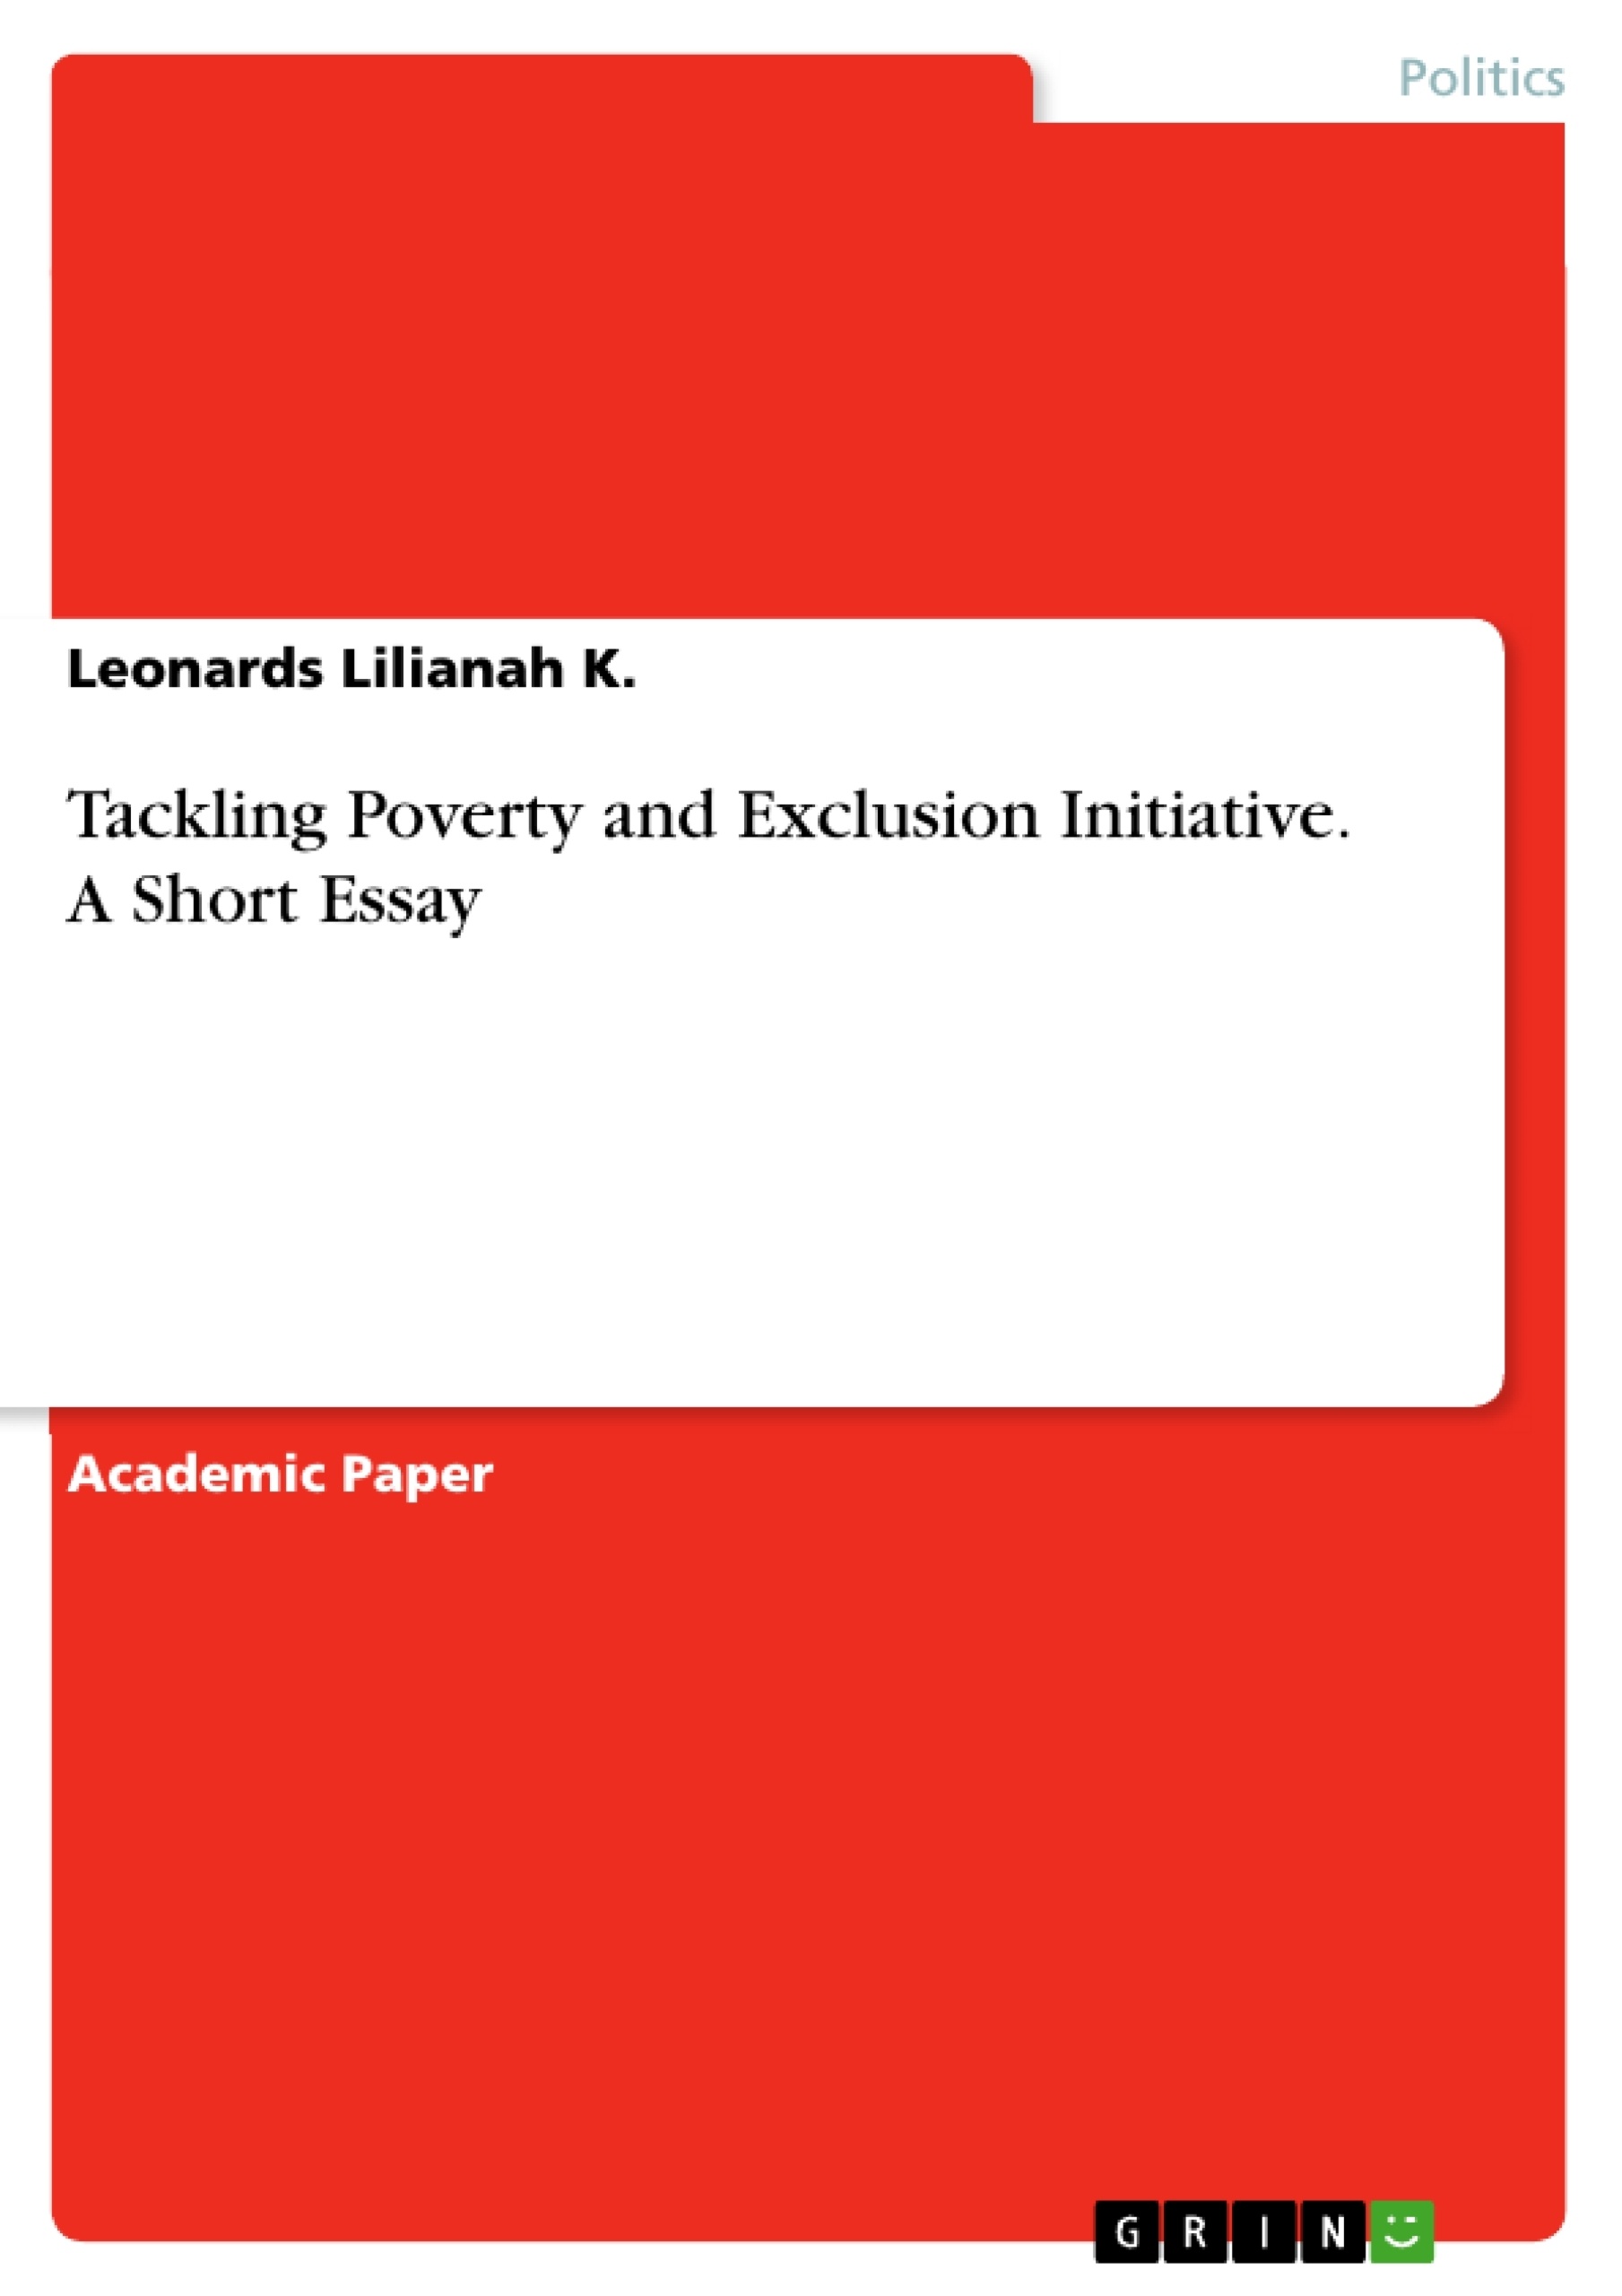 Titel: Tackling Poverty and Exclusion Initiative. A Short Essay